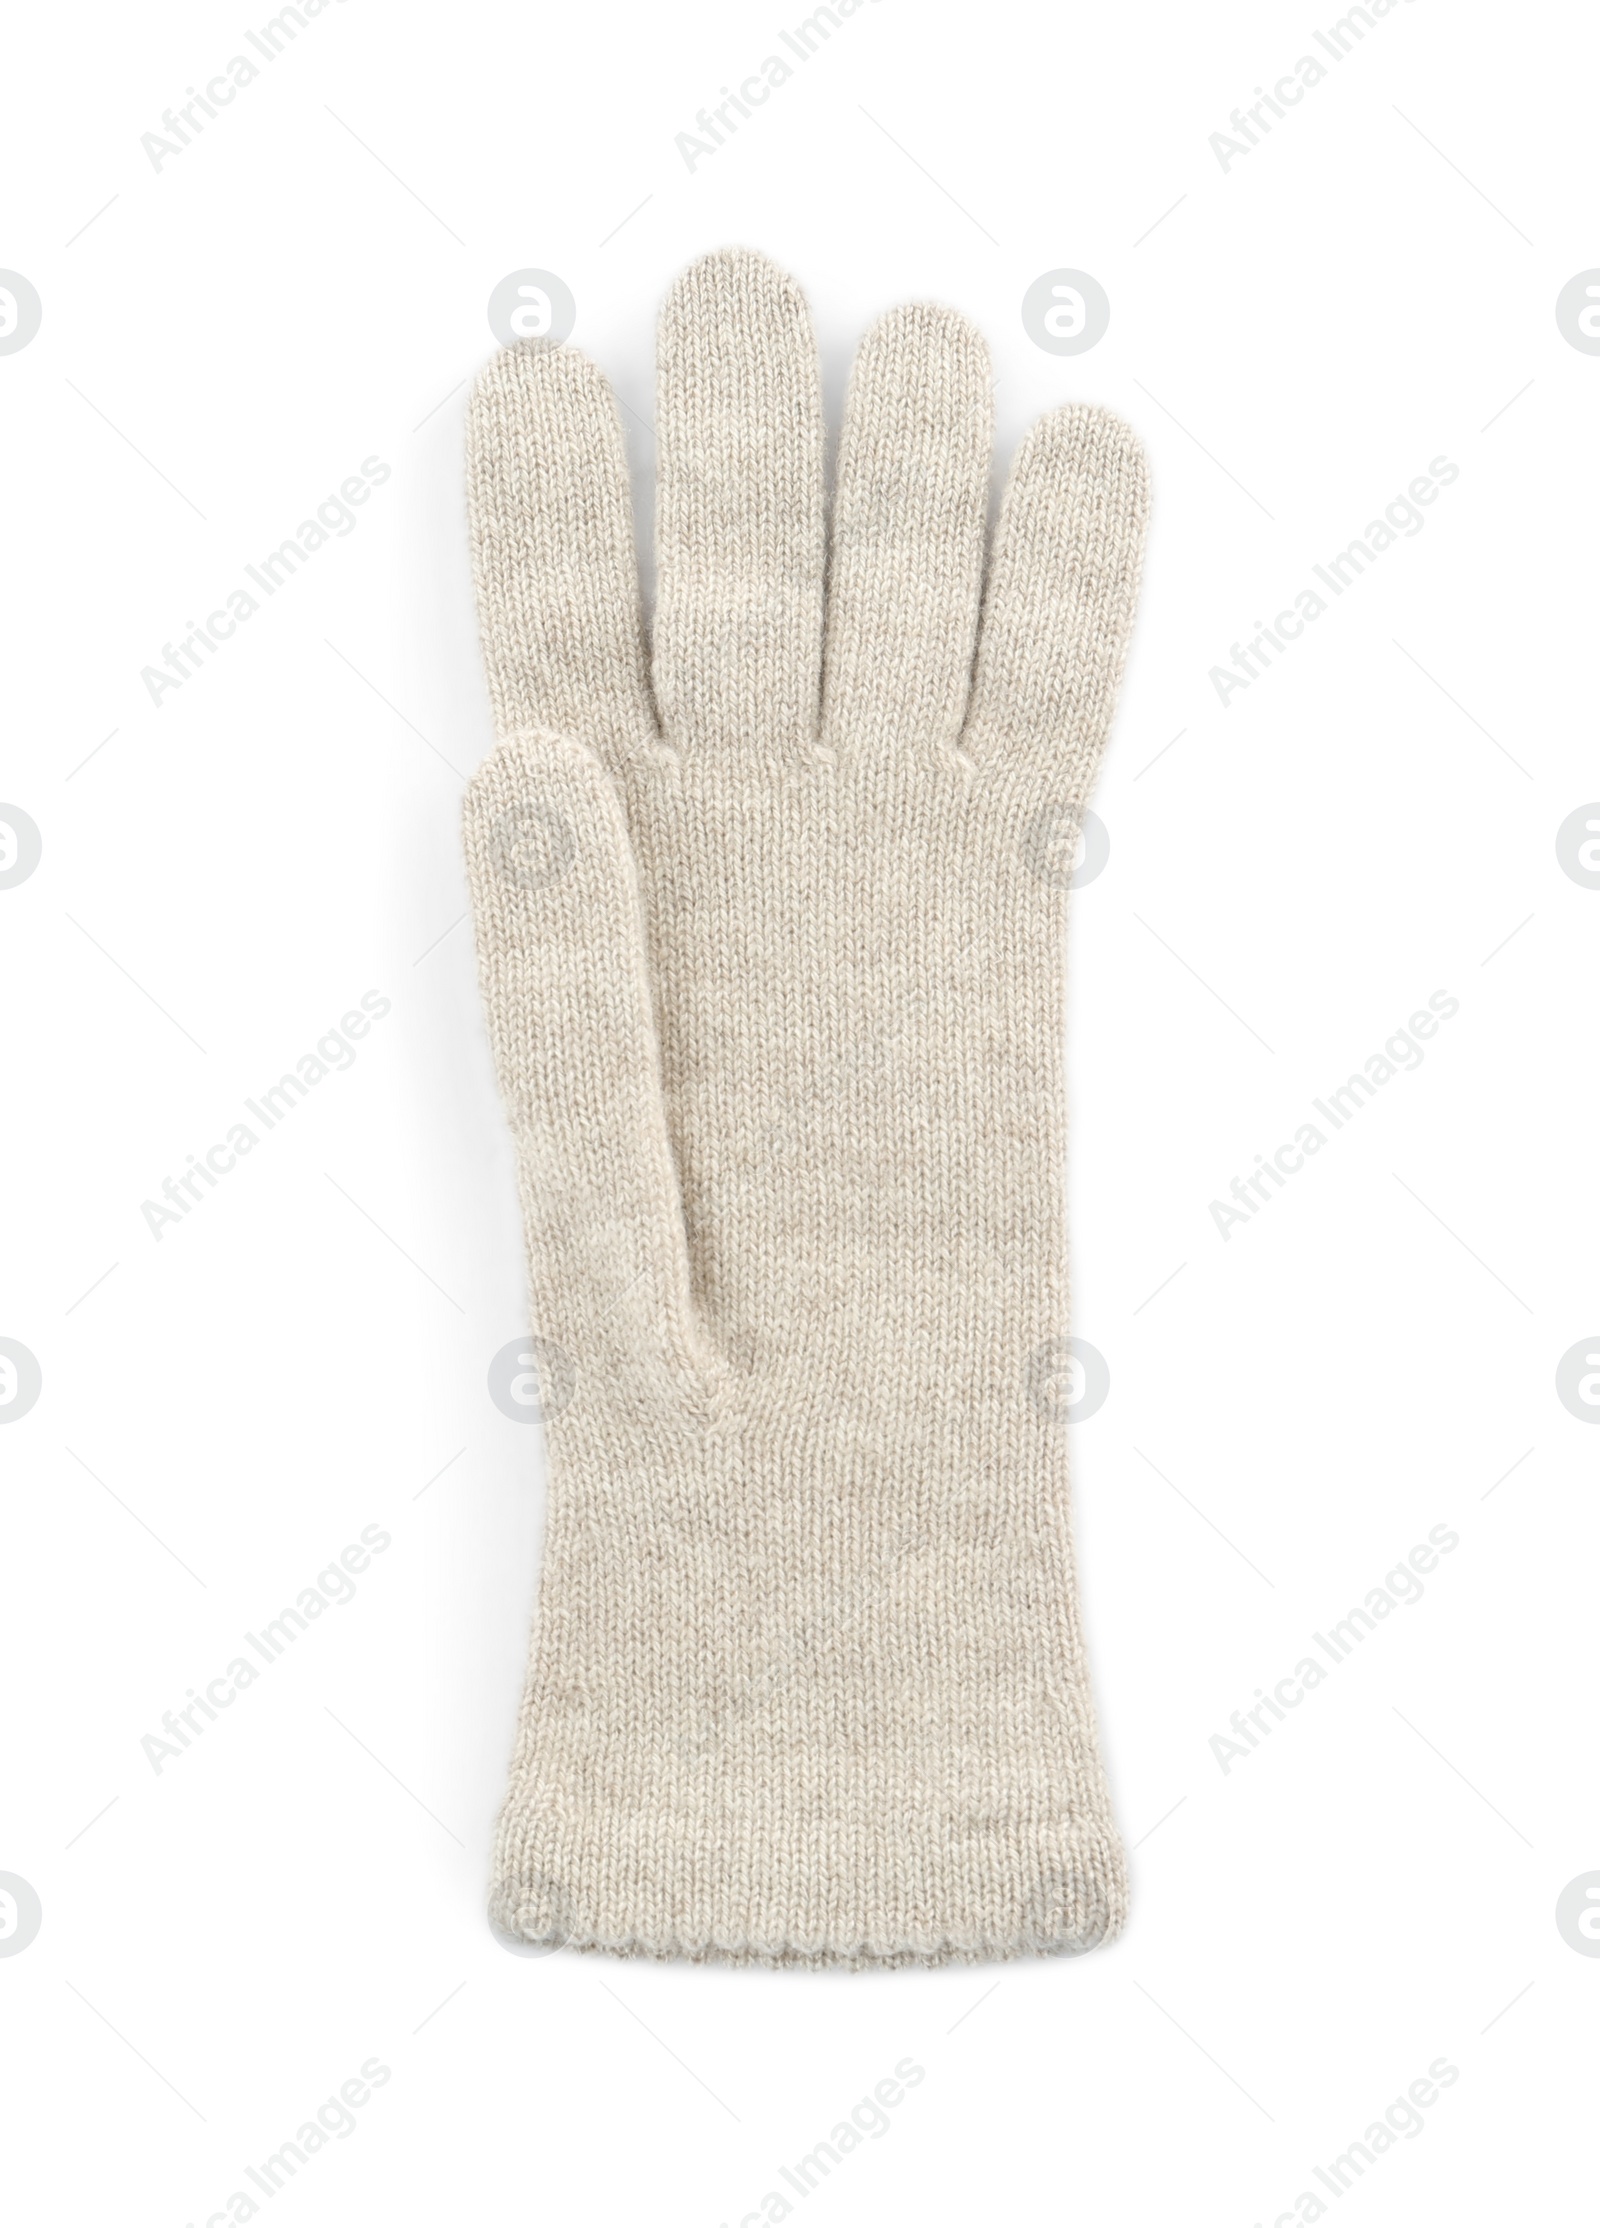 Photo of Woolen glove isolated on white, top view. Winter clothes